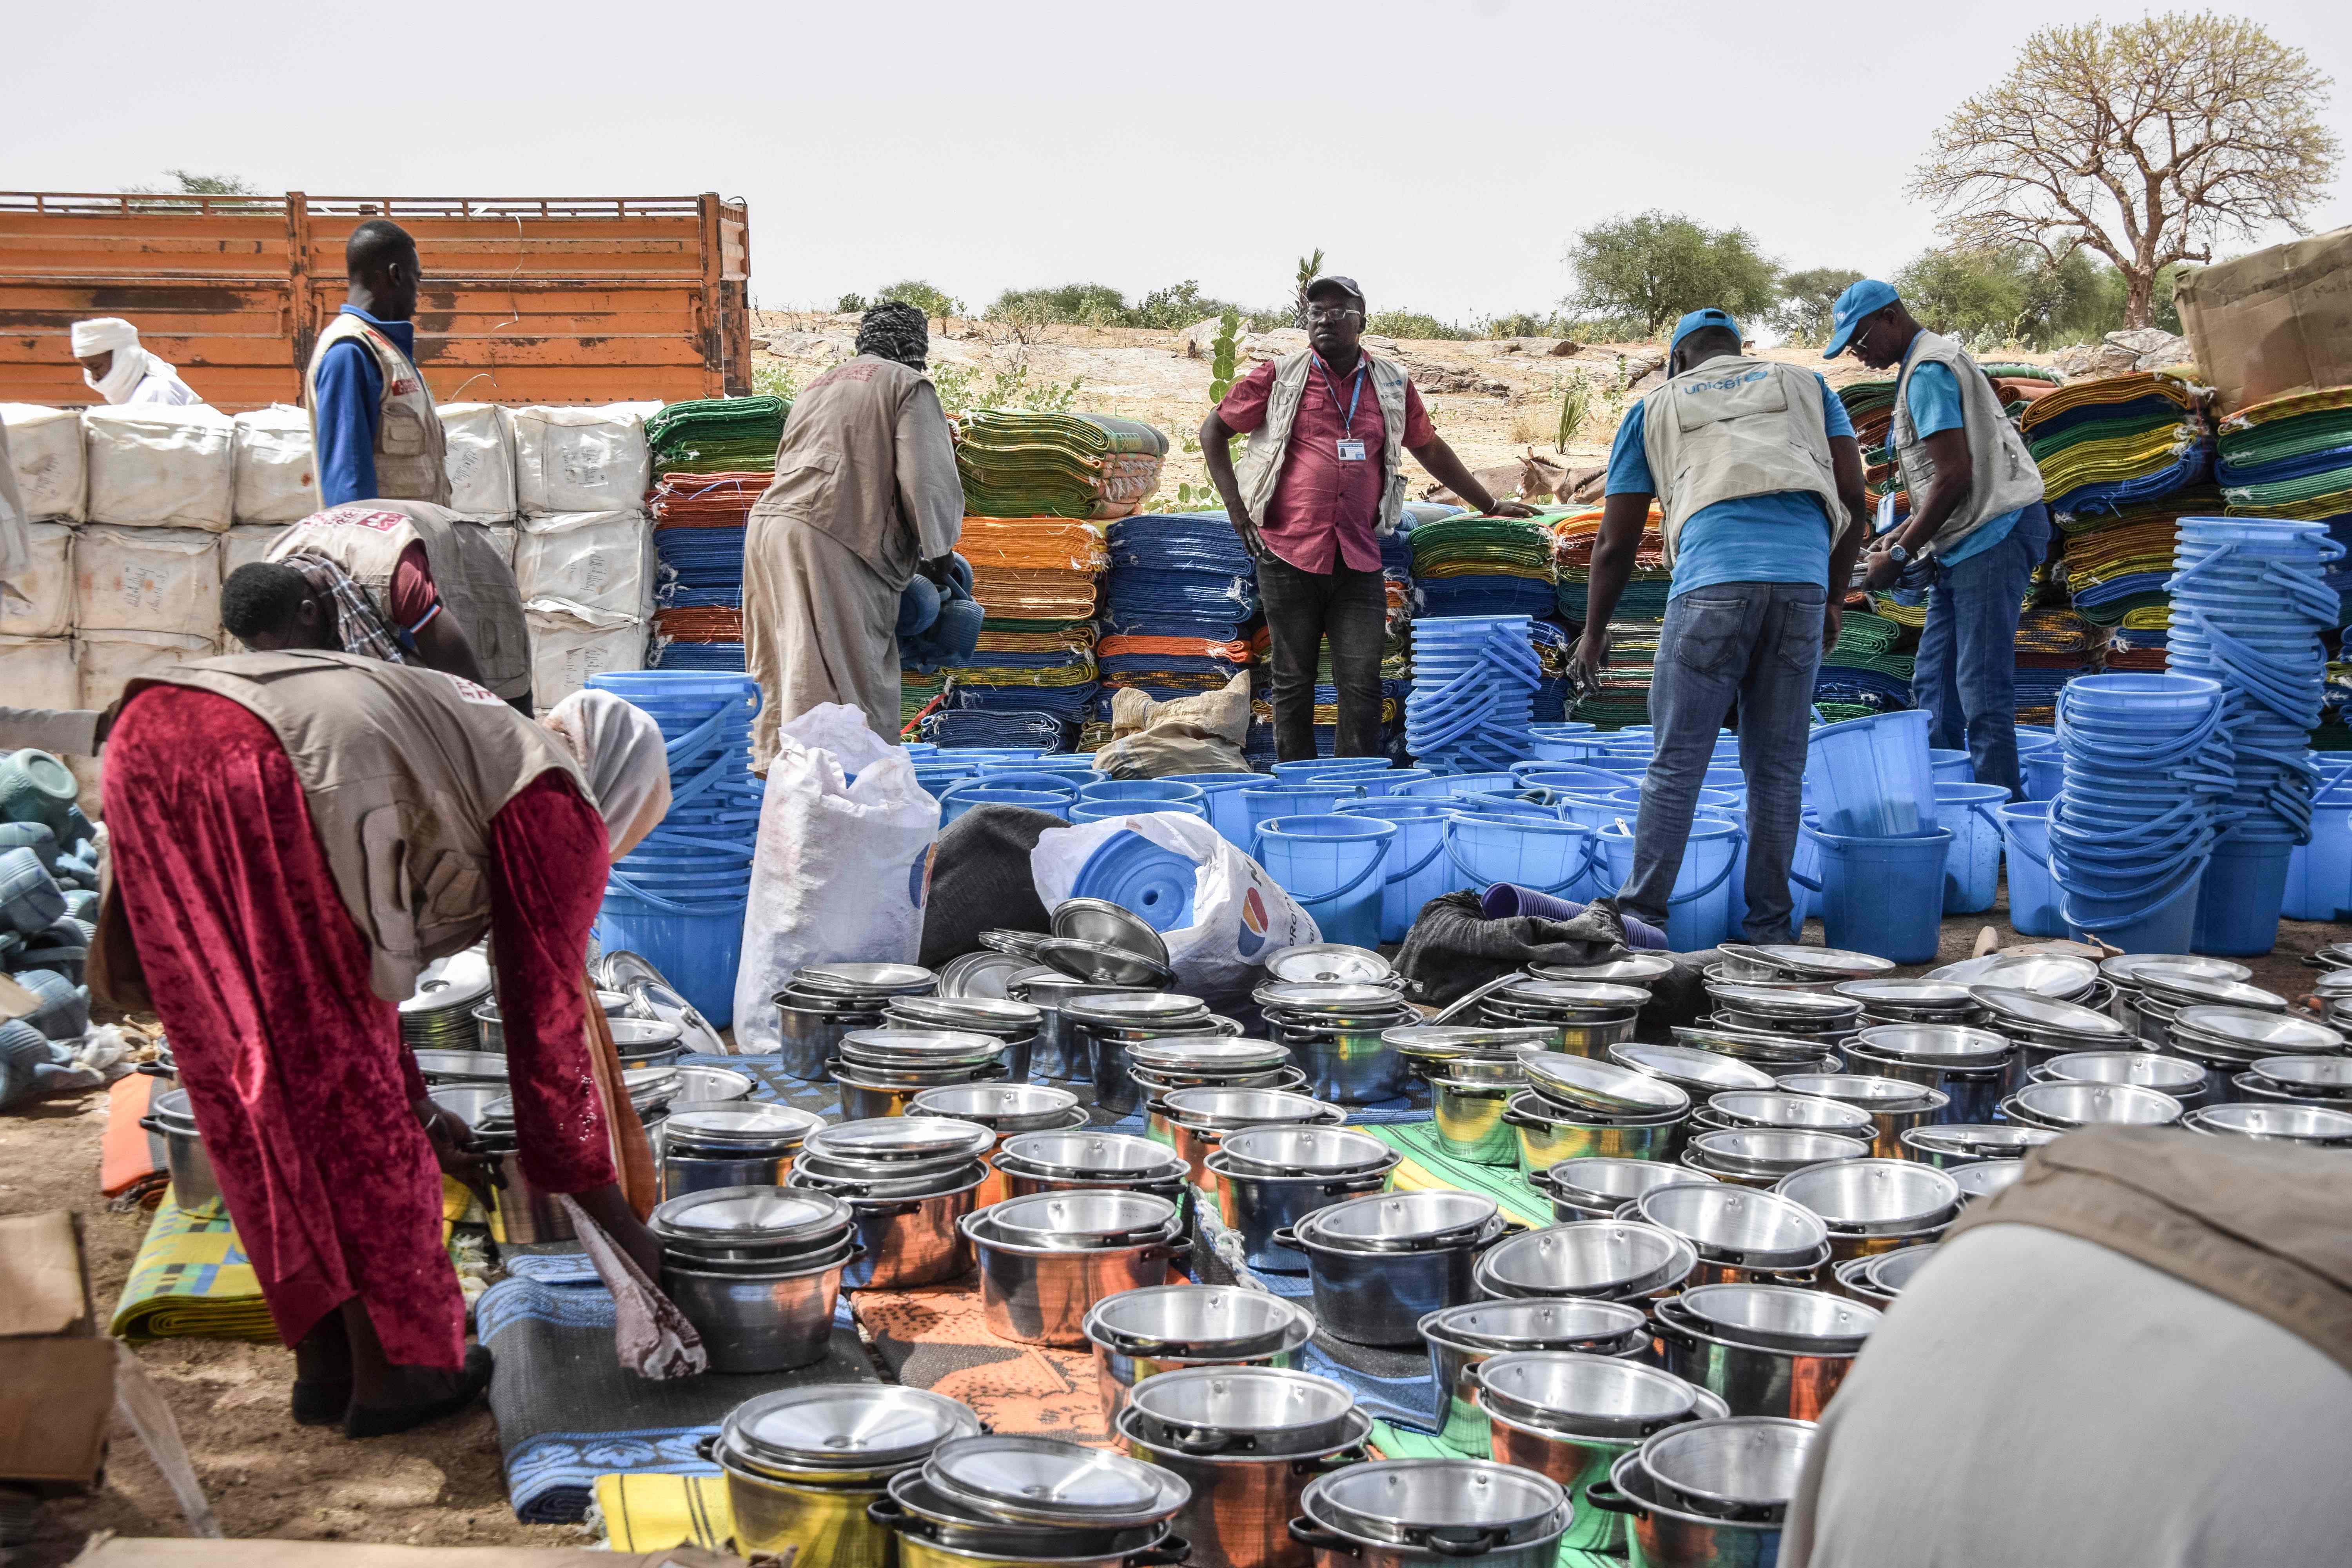 Personnel from the United Nations Children’s Fund (UNICEF) prepare aid kits for Sudanese refugees from the Tandelti area who crossed into Chad, in Koufroun, near Echbara, on April 30, 2023